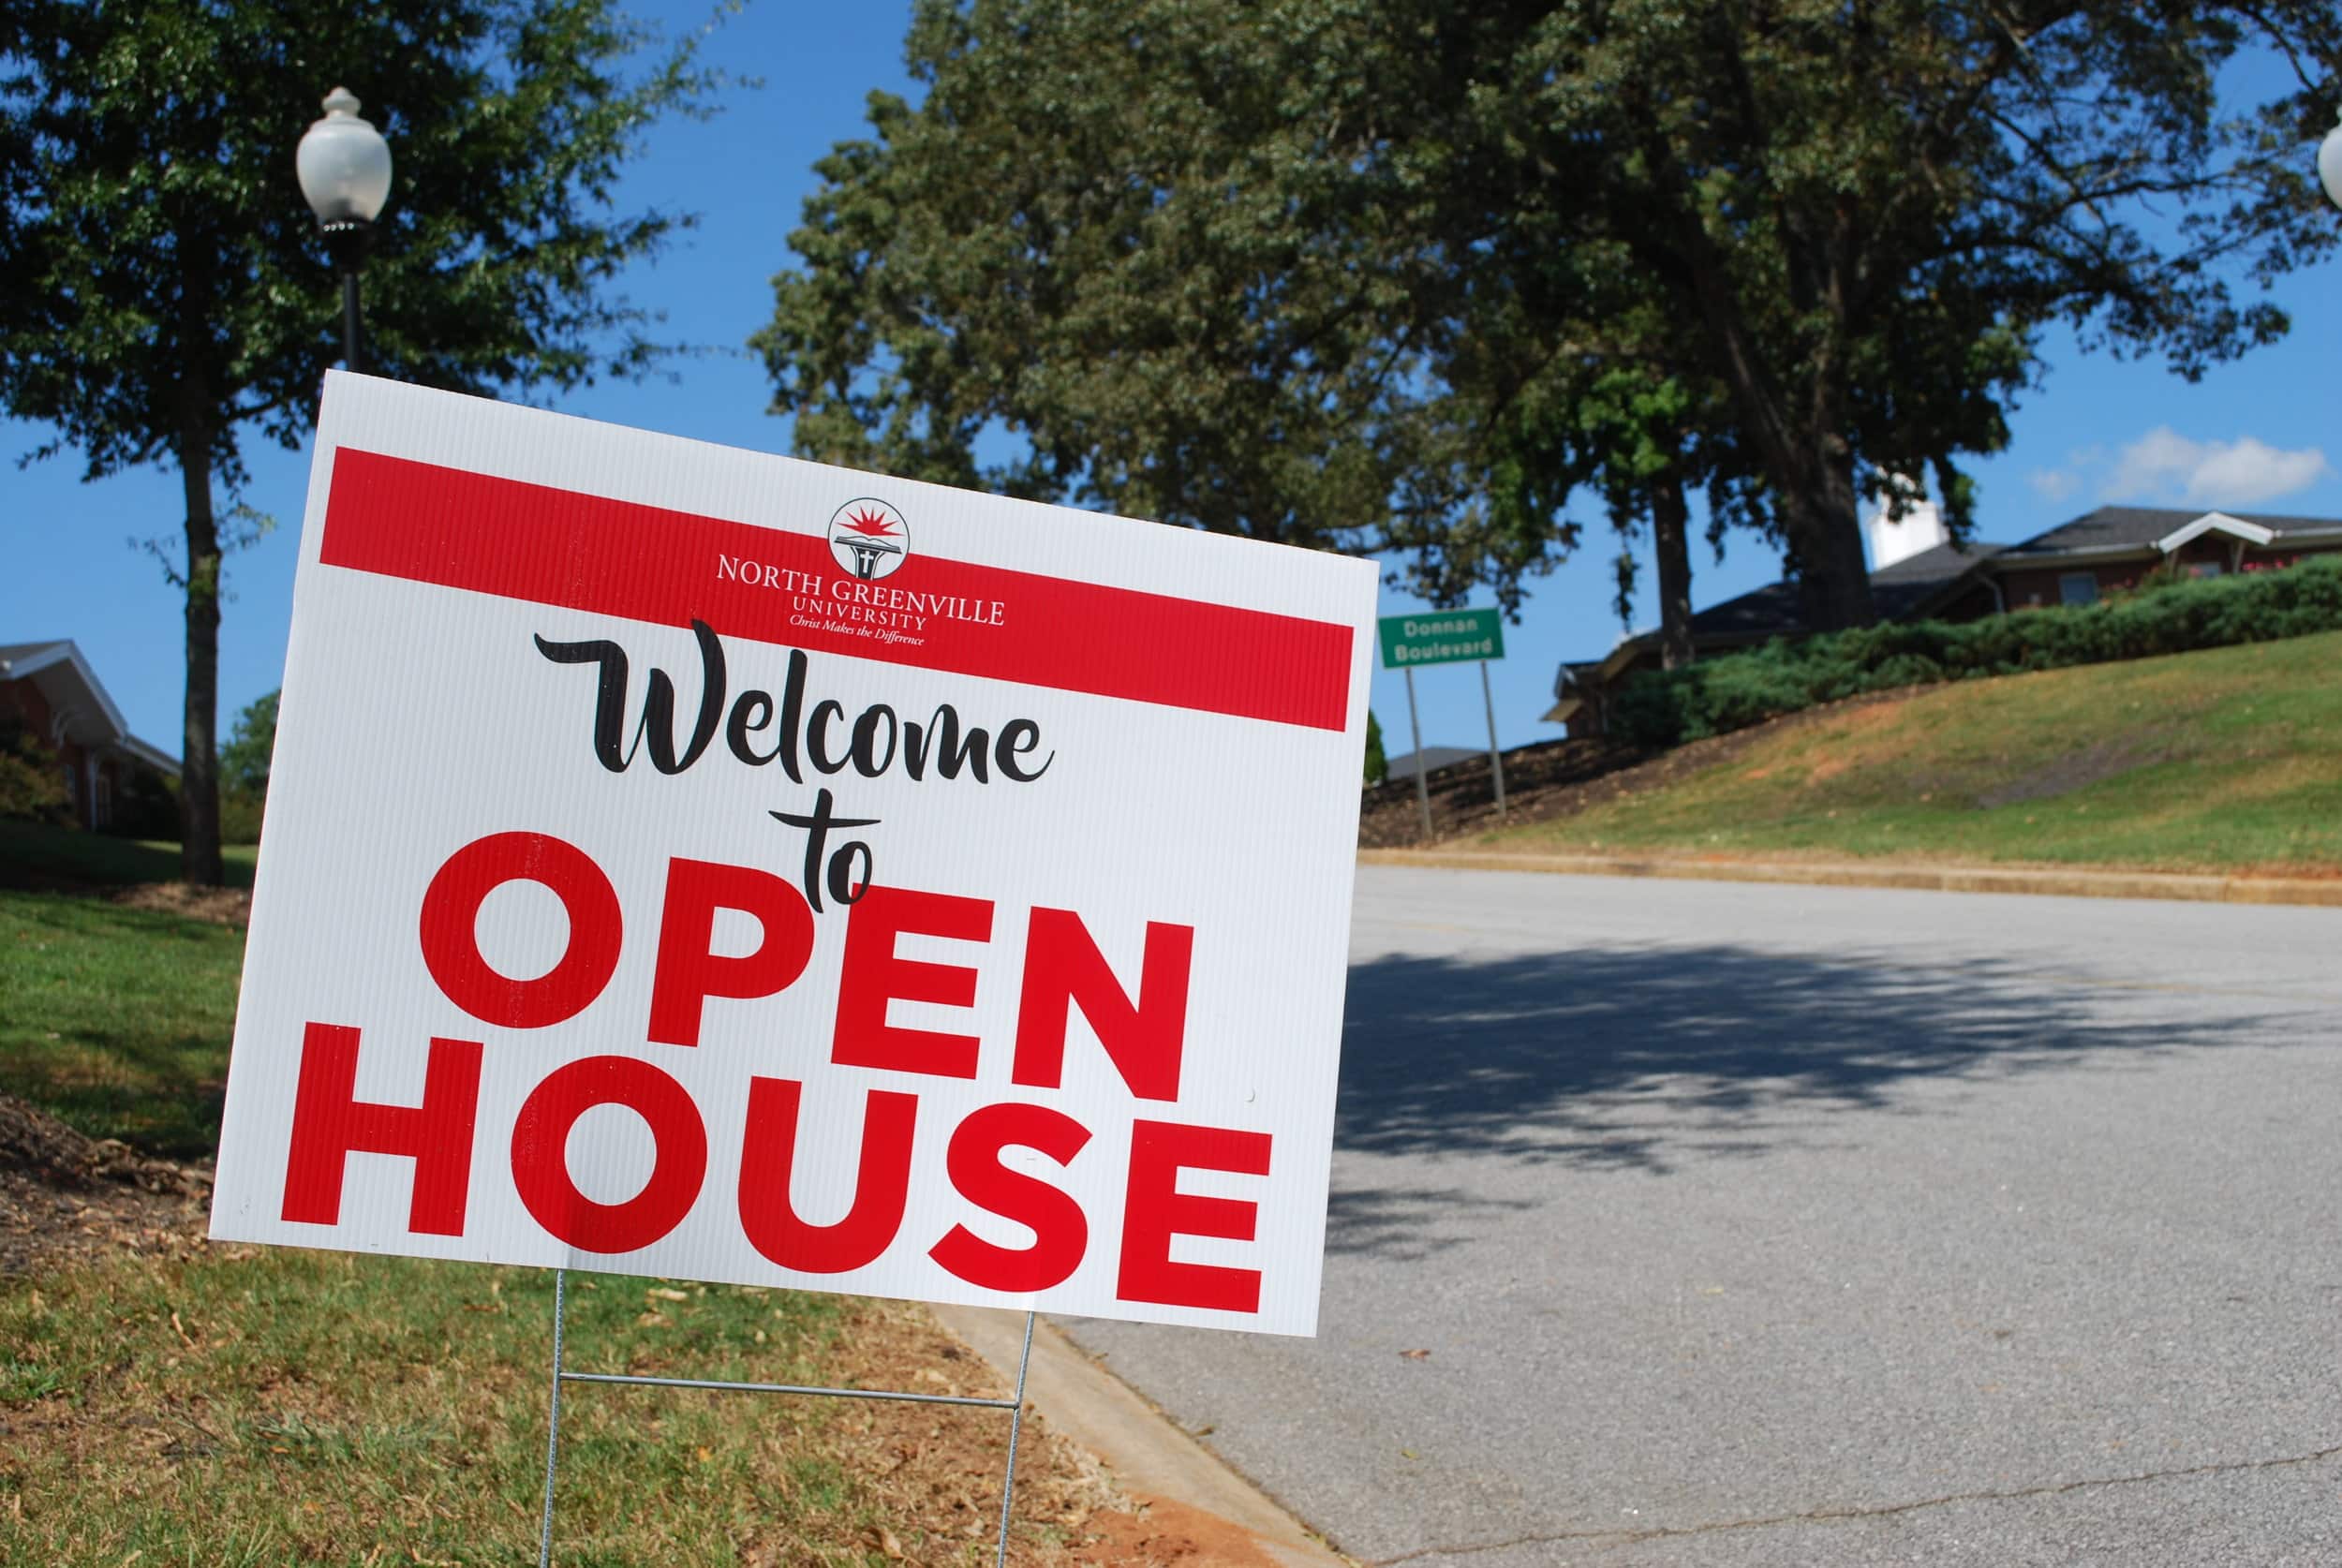 North Greenville University welcomed prospective students to its open house on Saturday, September 23, 2017.